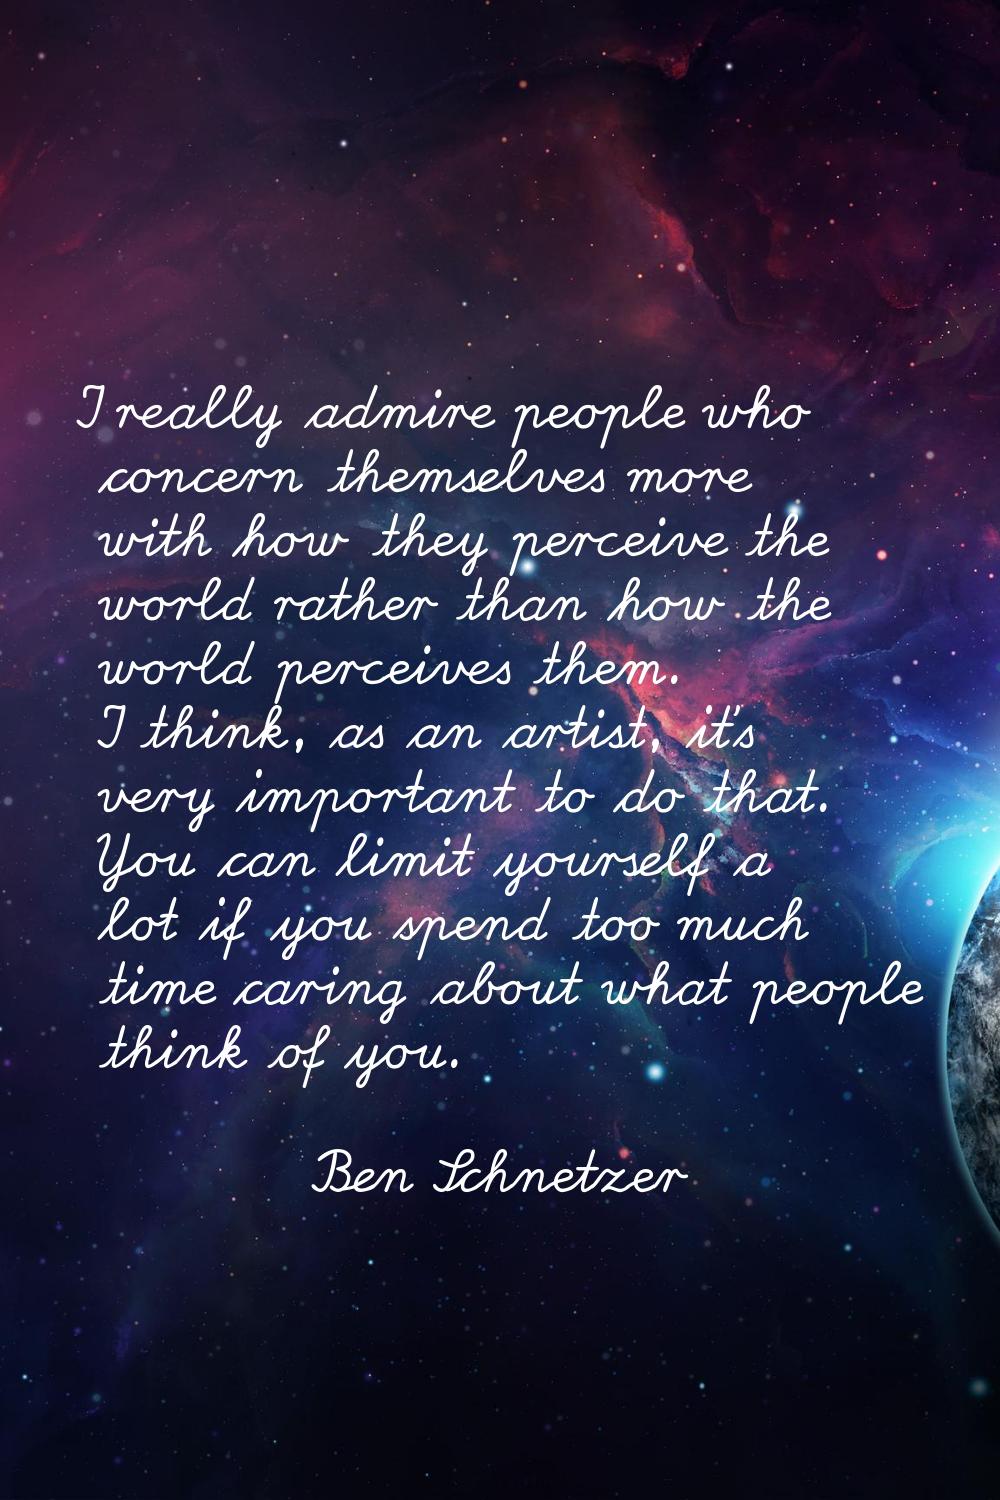 I really admire people who concern themselves more with how they perceive the world rather than how